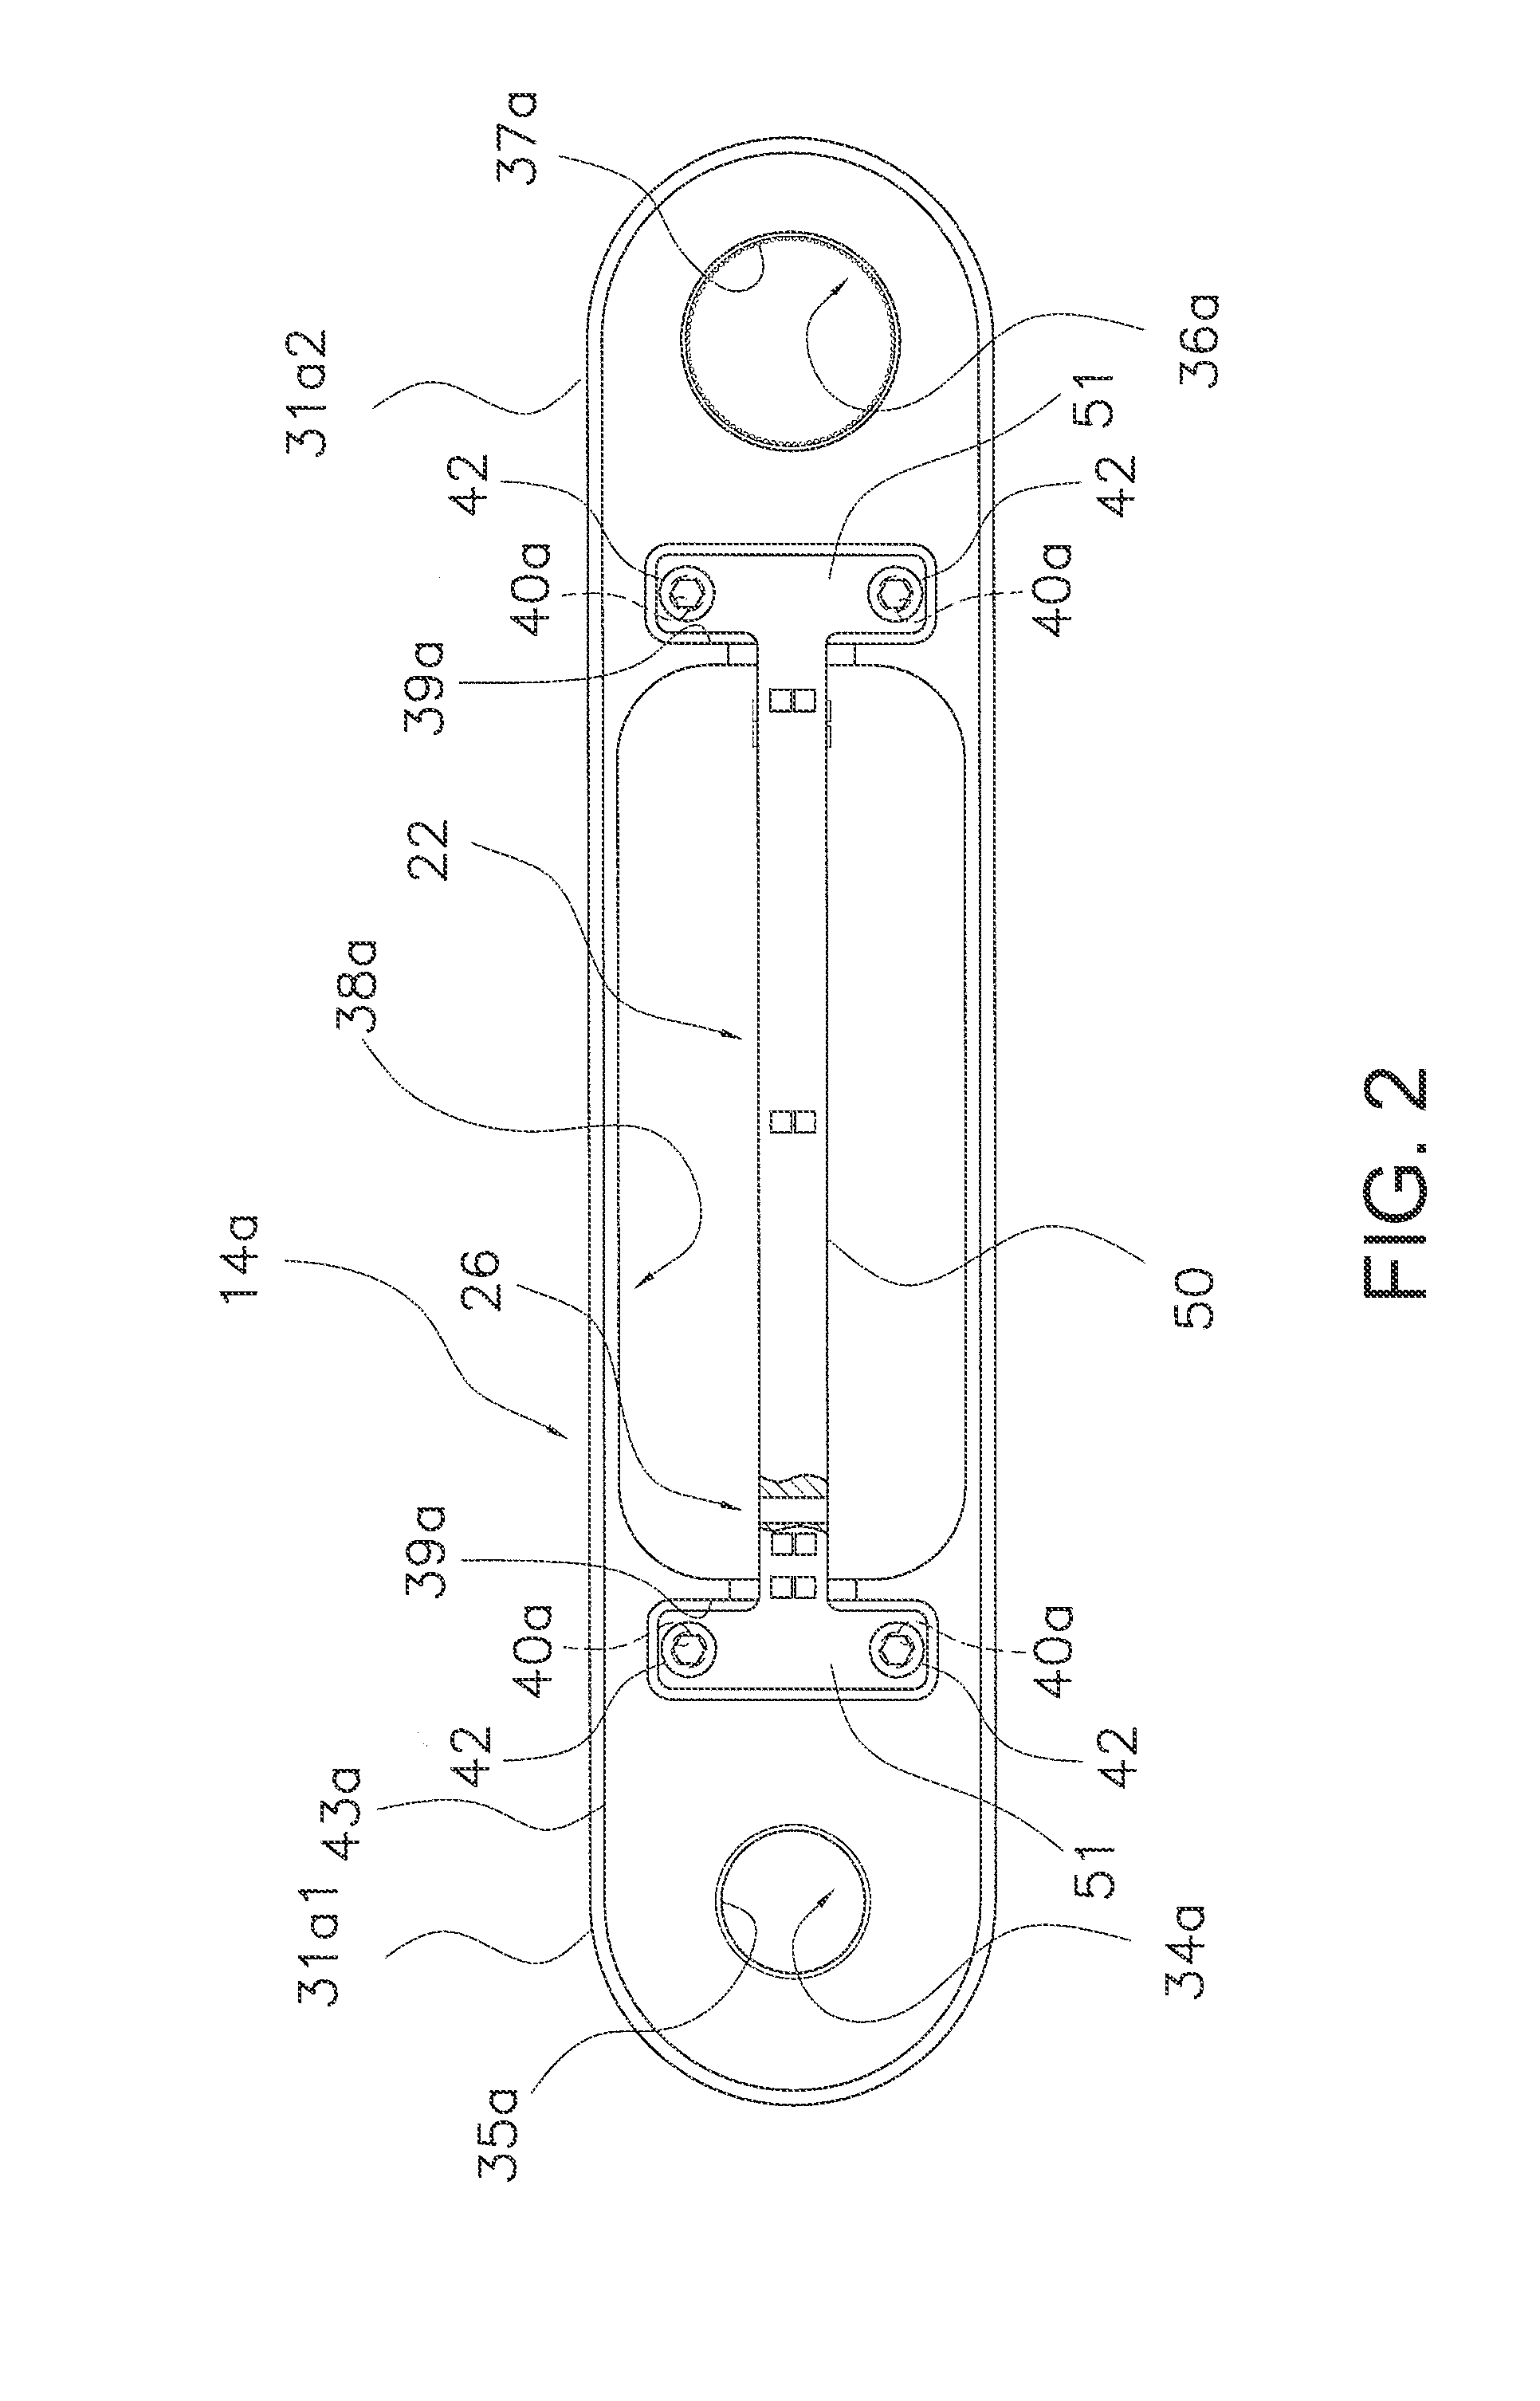 Pedaling force measurement device